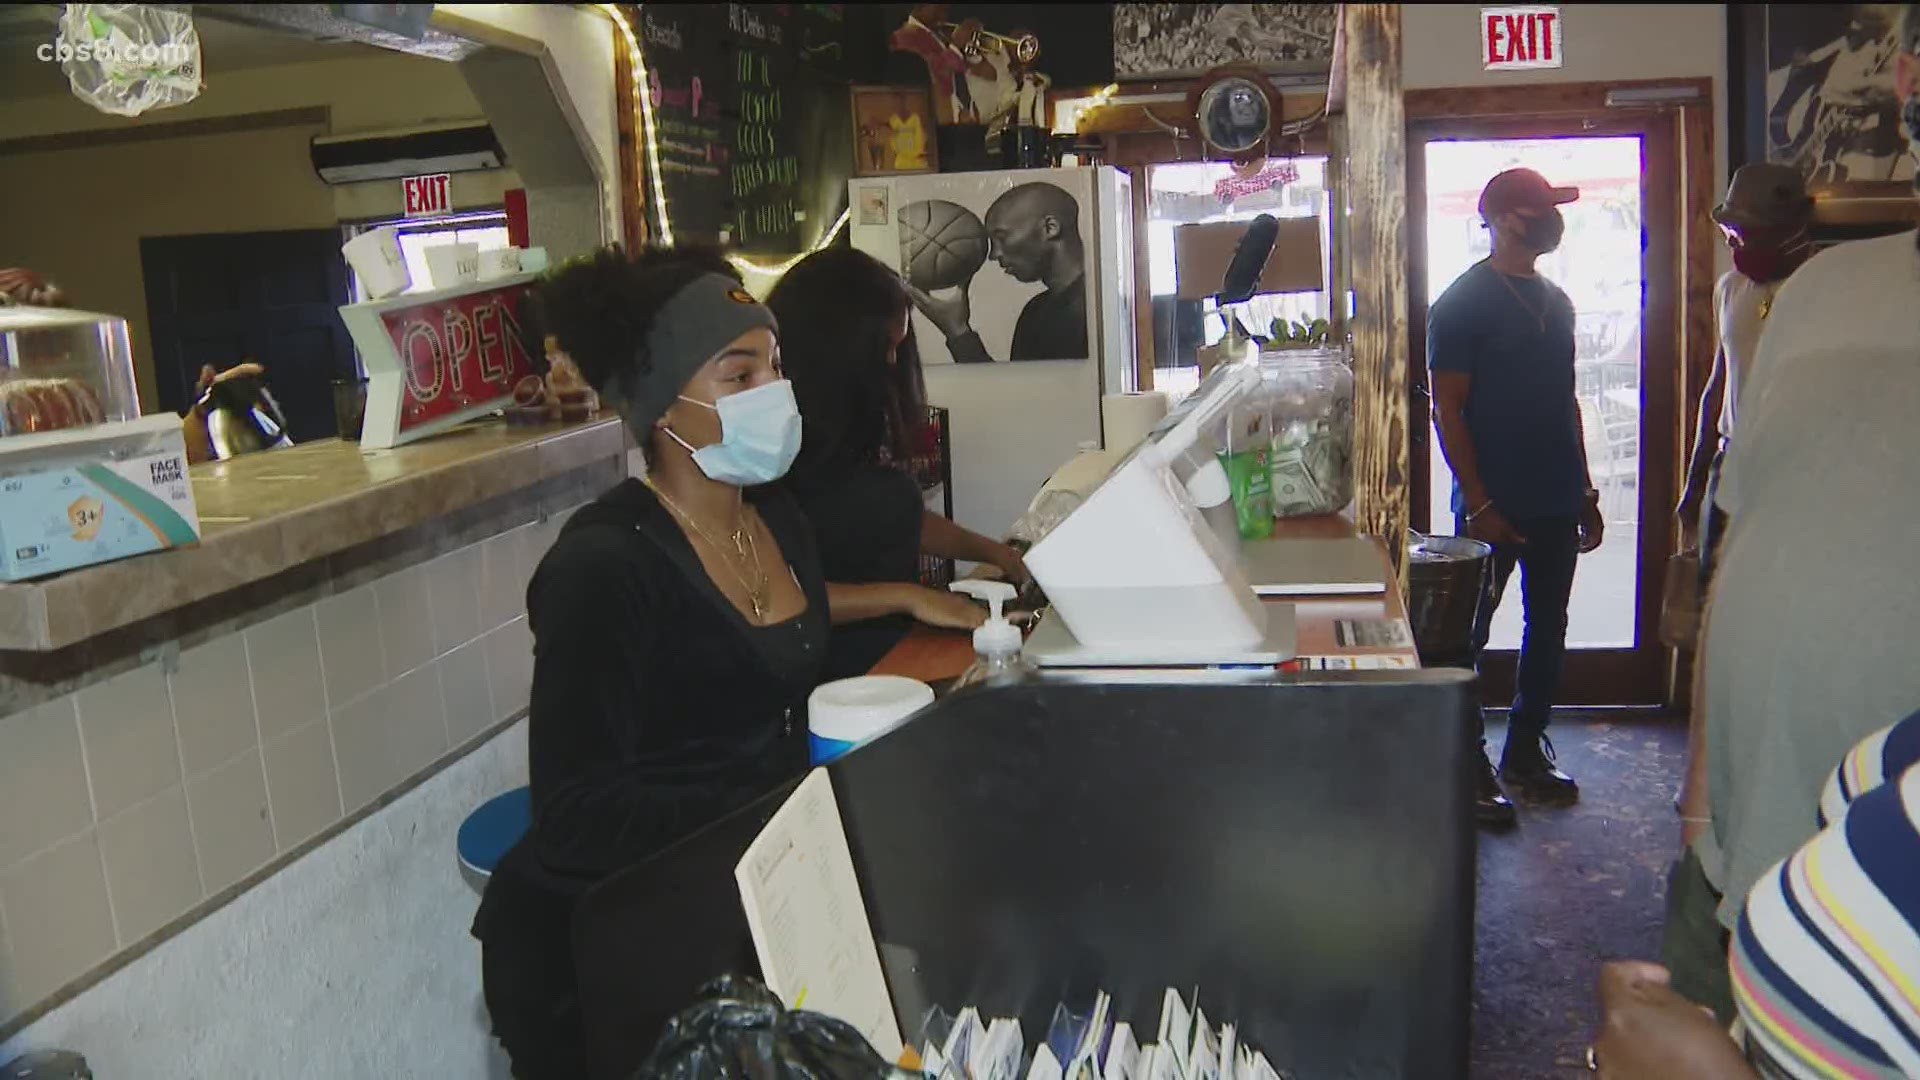 News 8 has received questions about face coverings, dining in, Public Health Order violations, the risk of getting COVID-19 from food and other queries about rules.